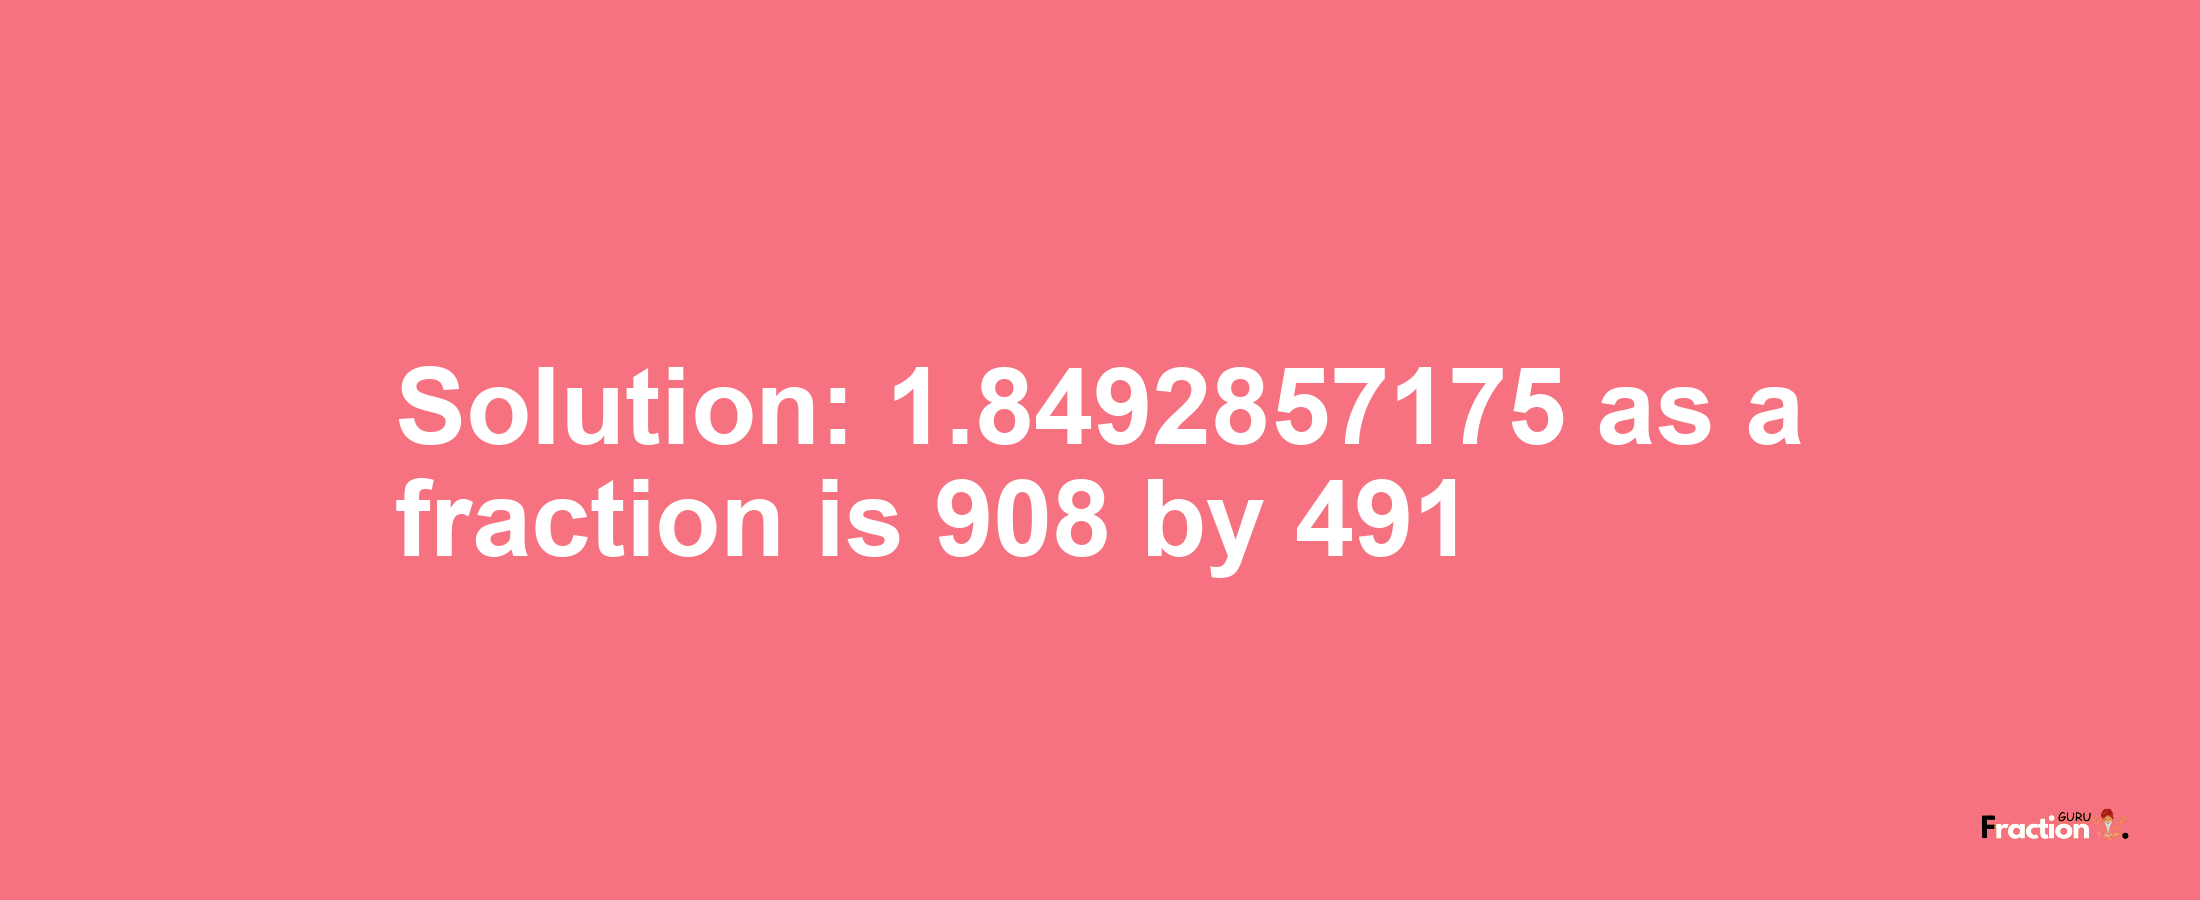 Solution:1.8492857175 as a fraction is 908/491